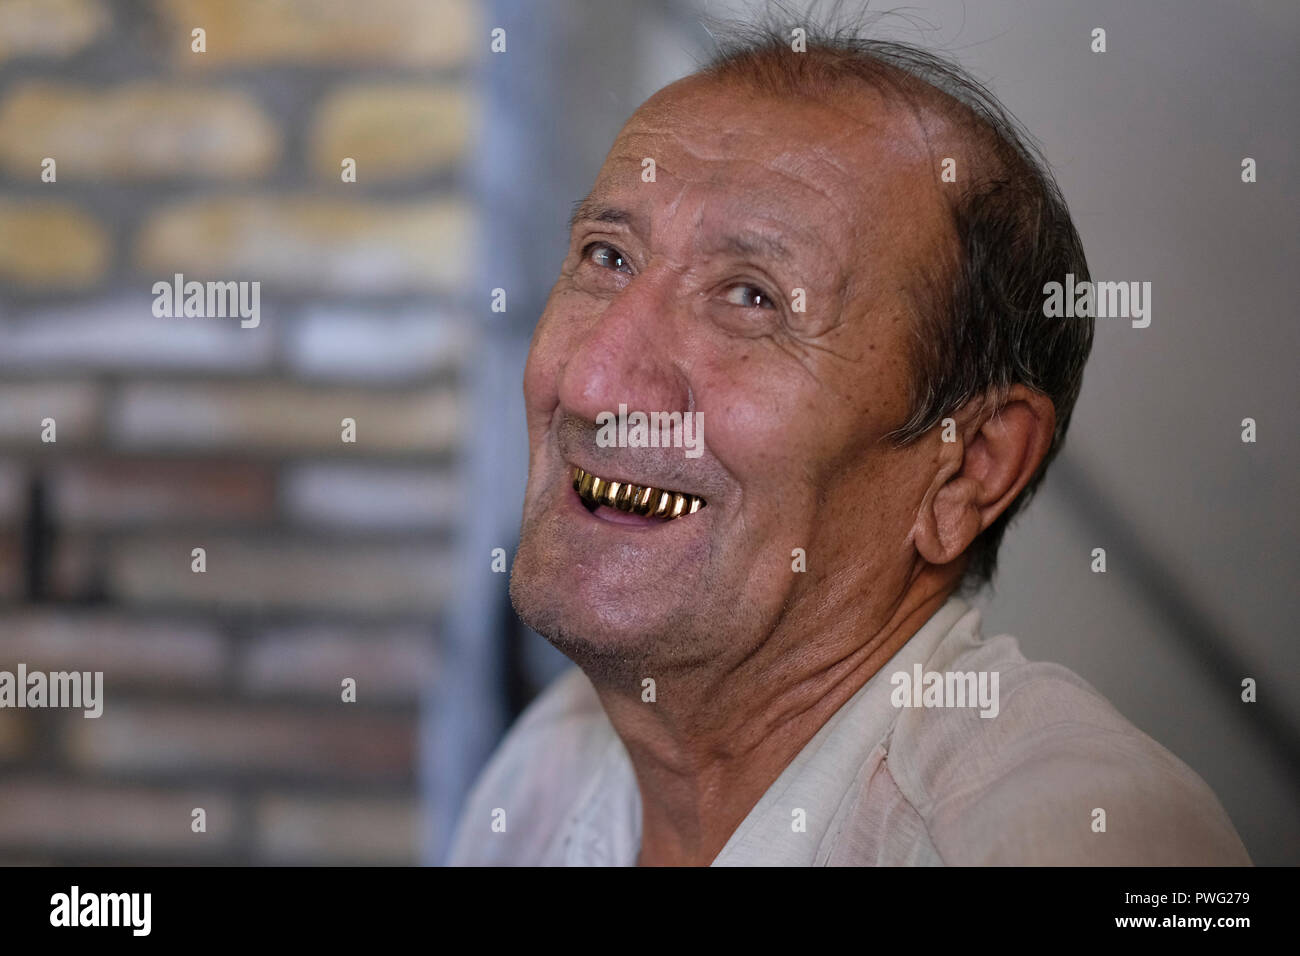 Uzbek man with gold capped teeth smiling in the historic city of Khiva the former capital of Khwarezmia and the Khanate of Khiva listed as Unesco world heritage site located in Xorazm Region, Uzbekistan. Replacing natural teeth with gold implants or caps was once a status symbol and prestige in Uzbekistan and other countries of Central Asia. Stock Photo